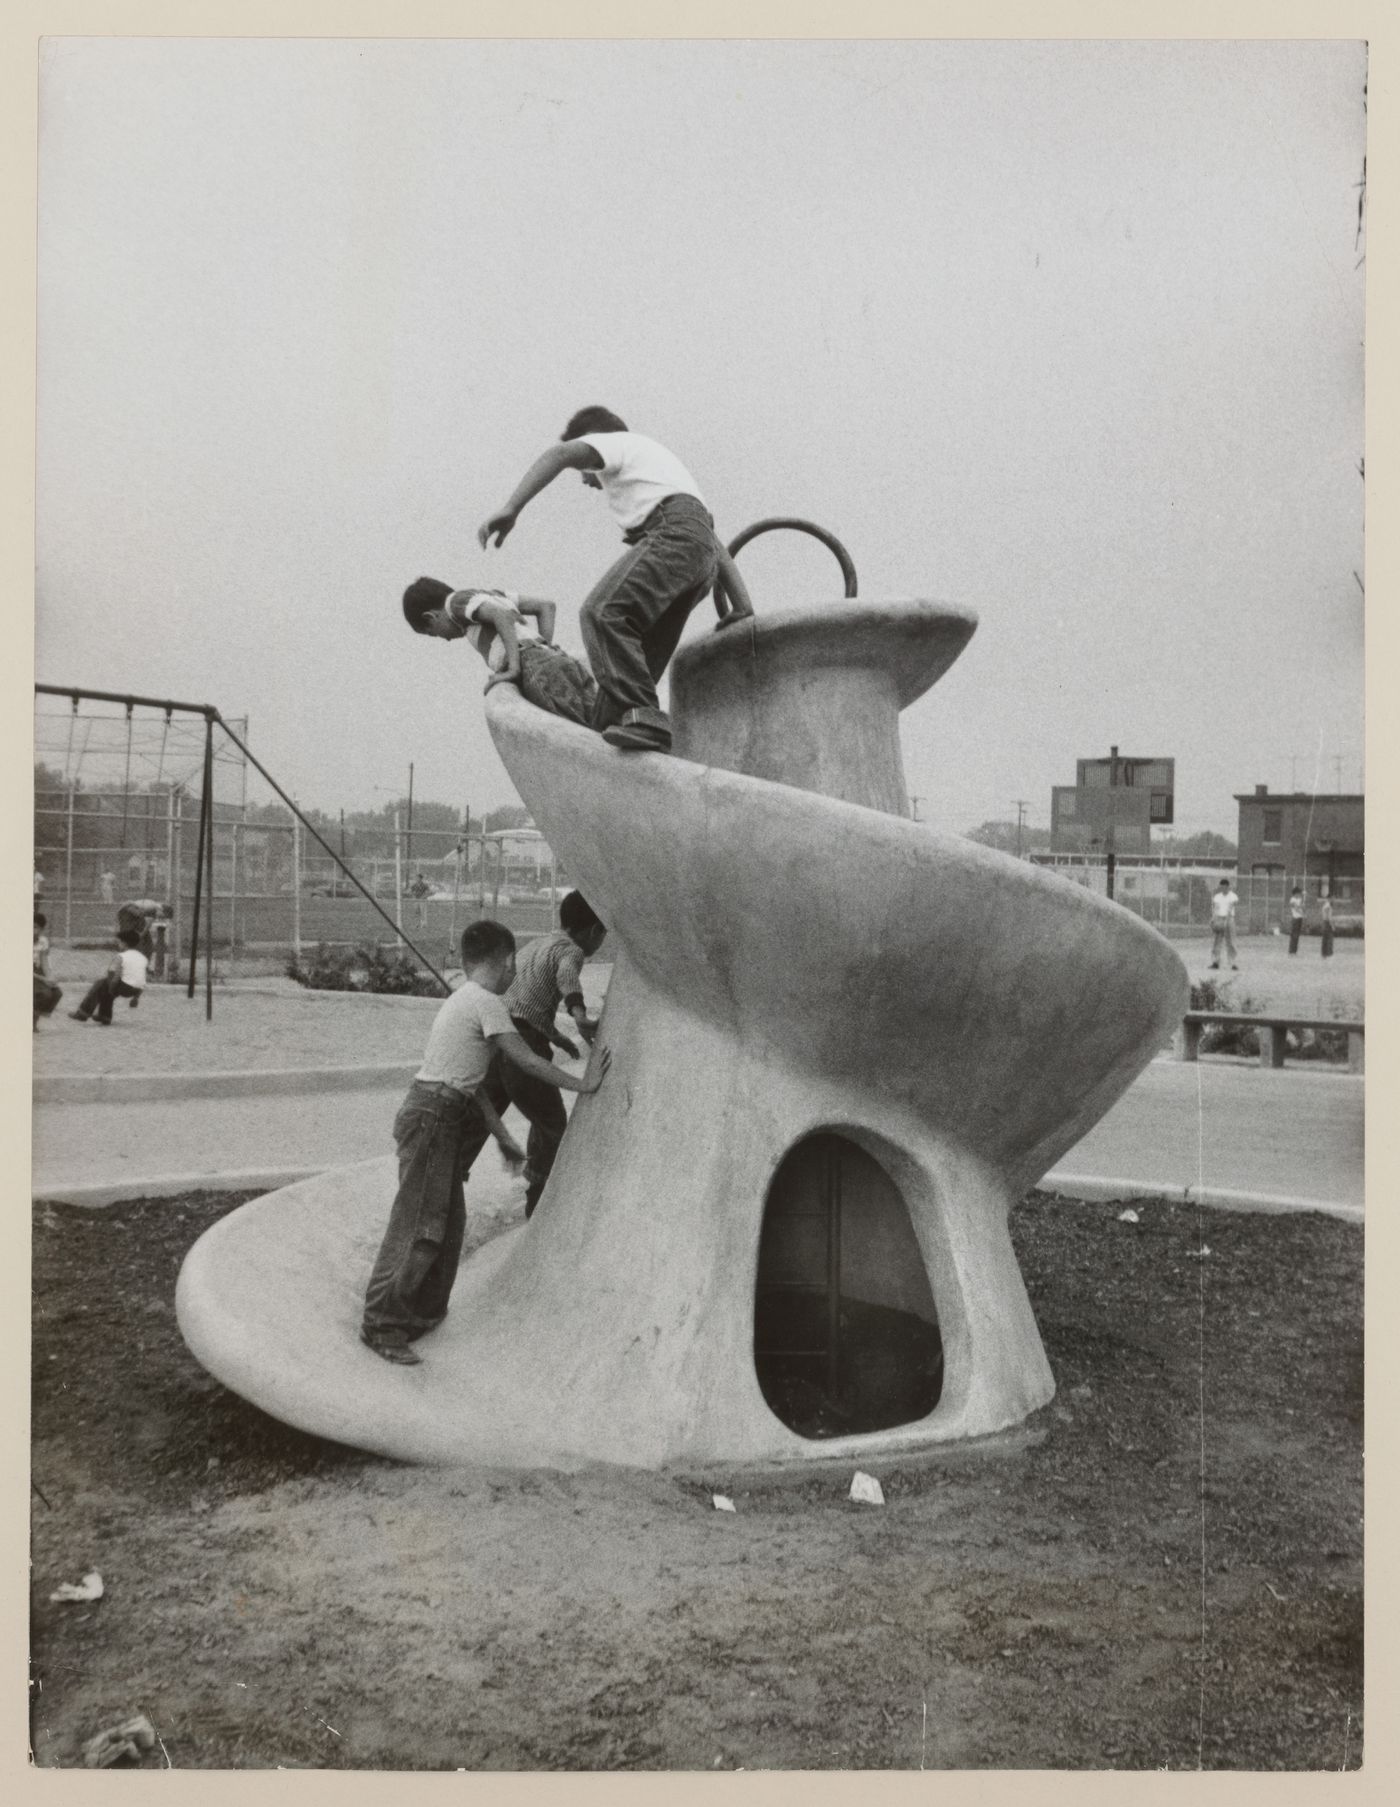 View of children playing in recreational area, 18th and Bigler Streets, Philadelphia, Pennsylvania